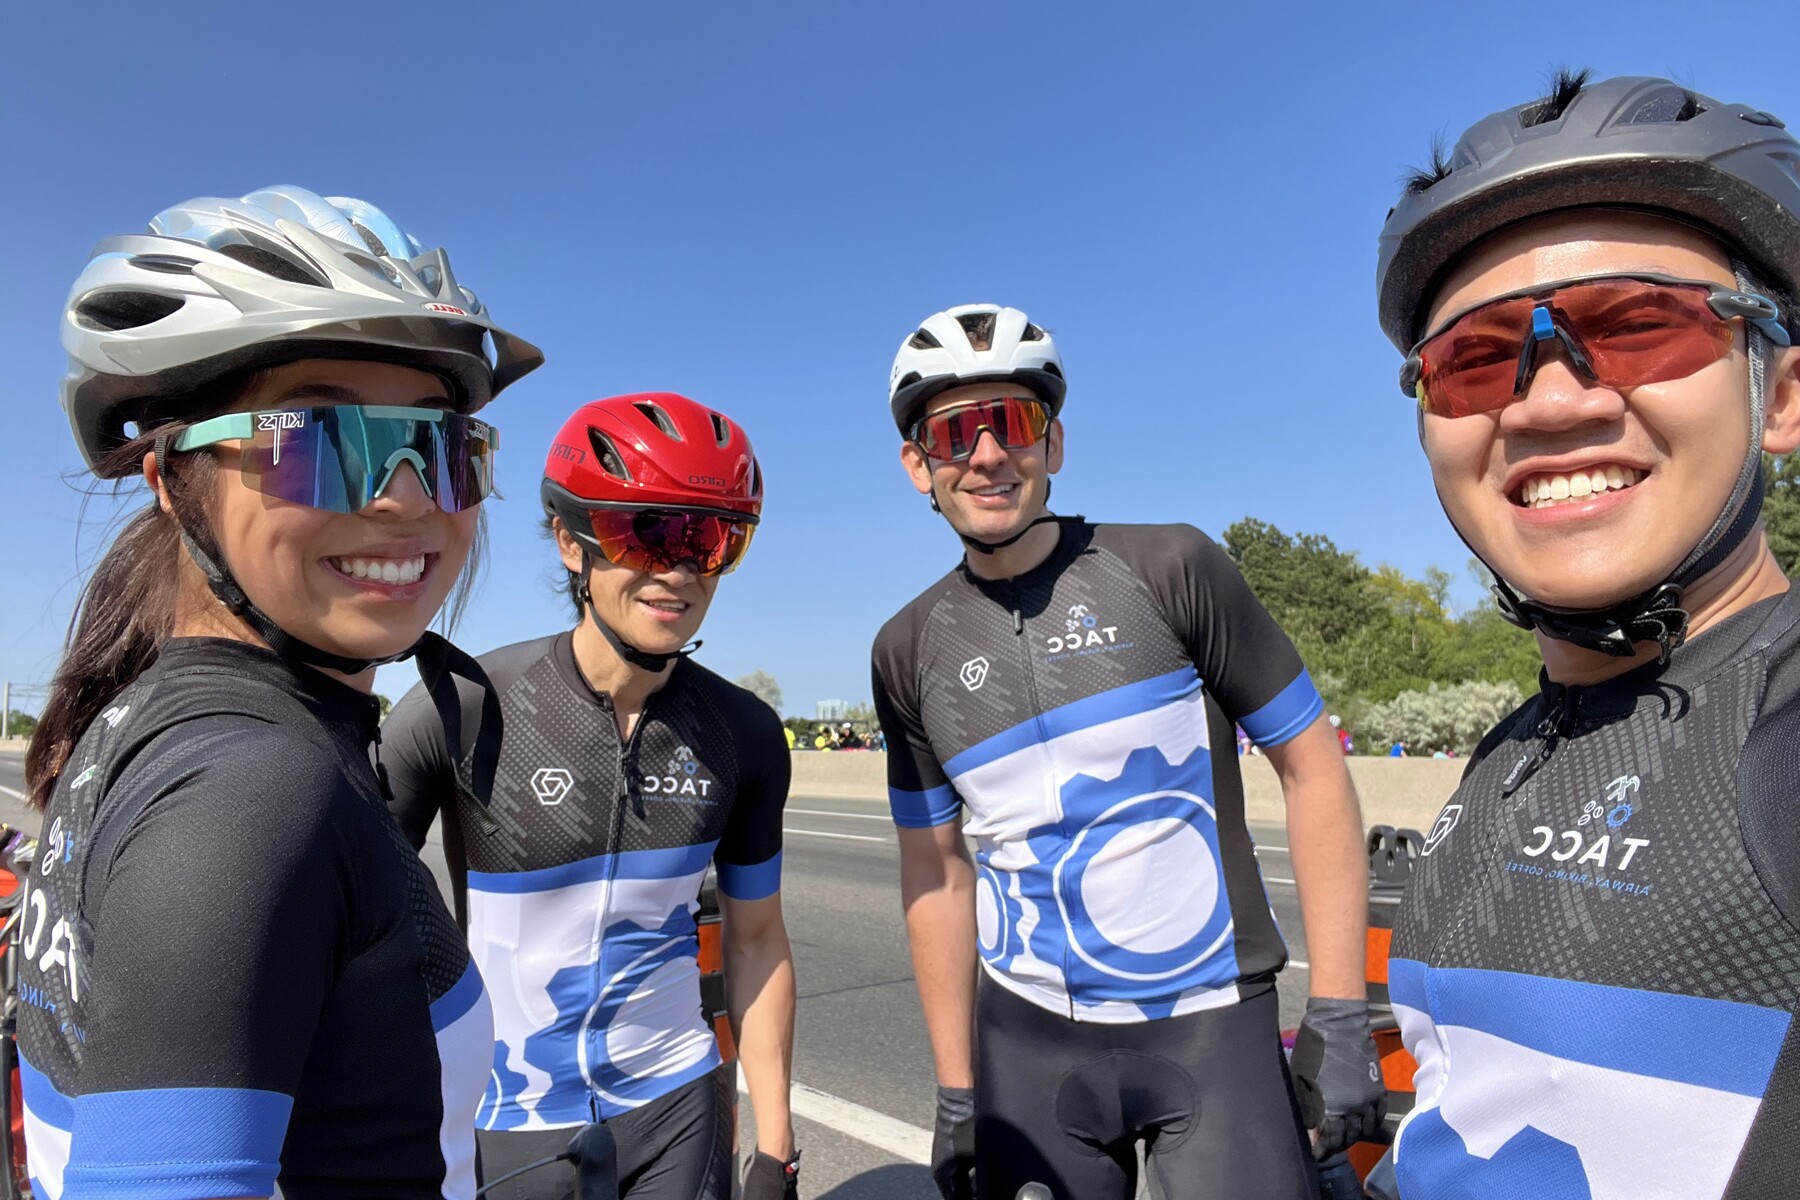 Members of the The Toronto Anesthesia Cycling Club 